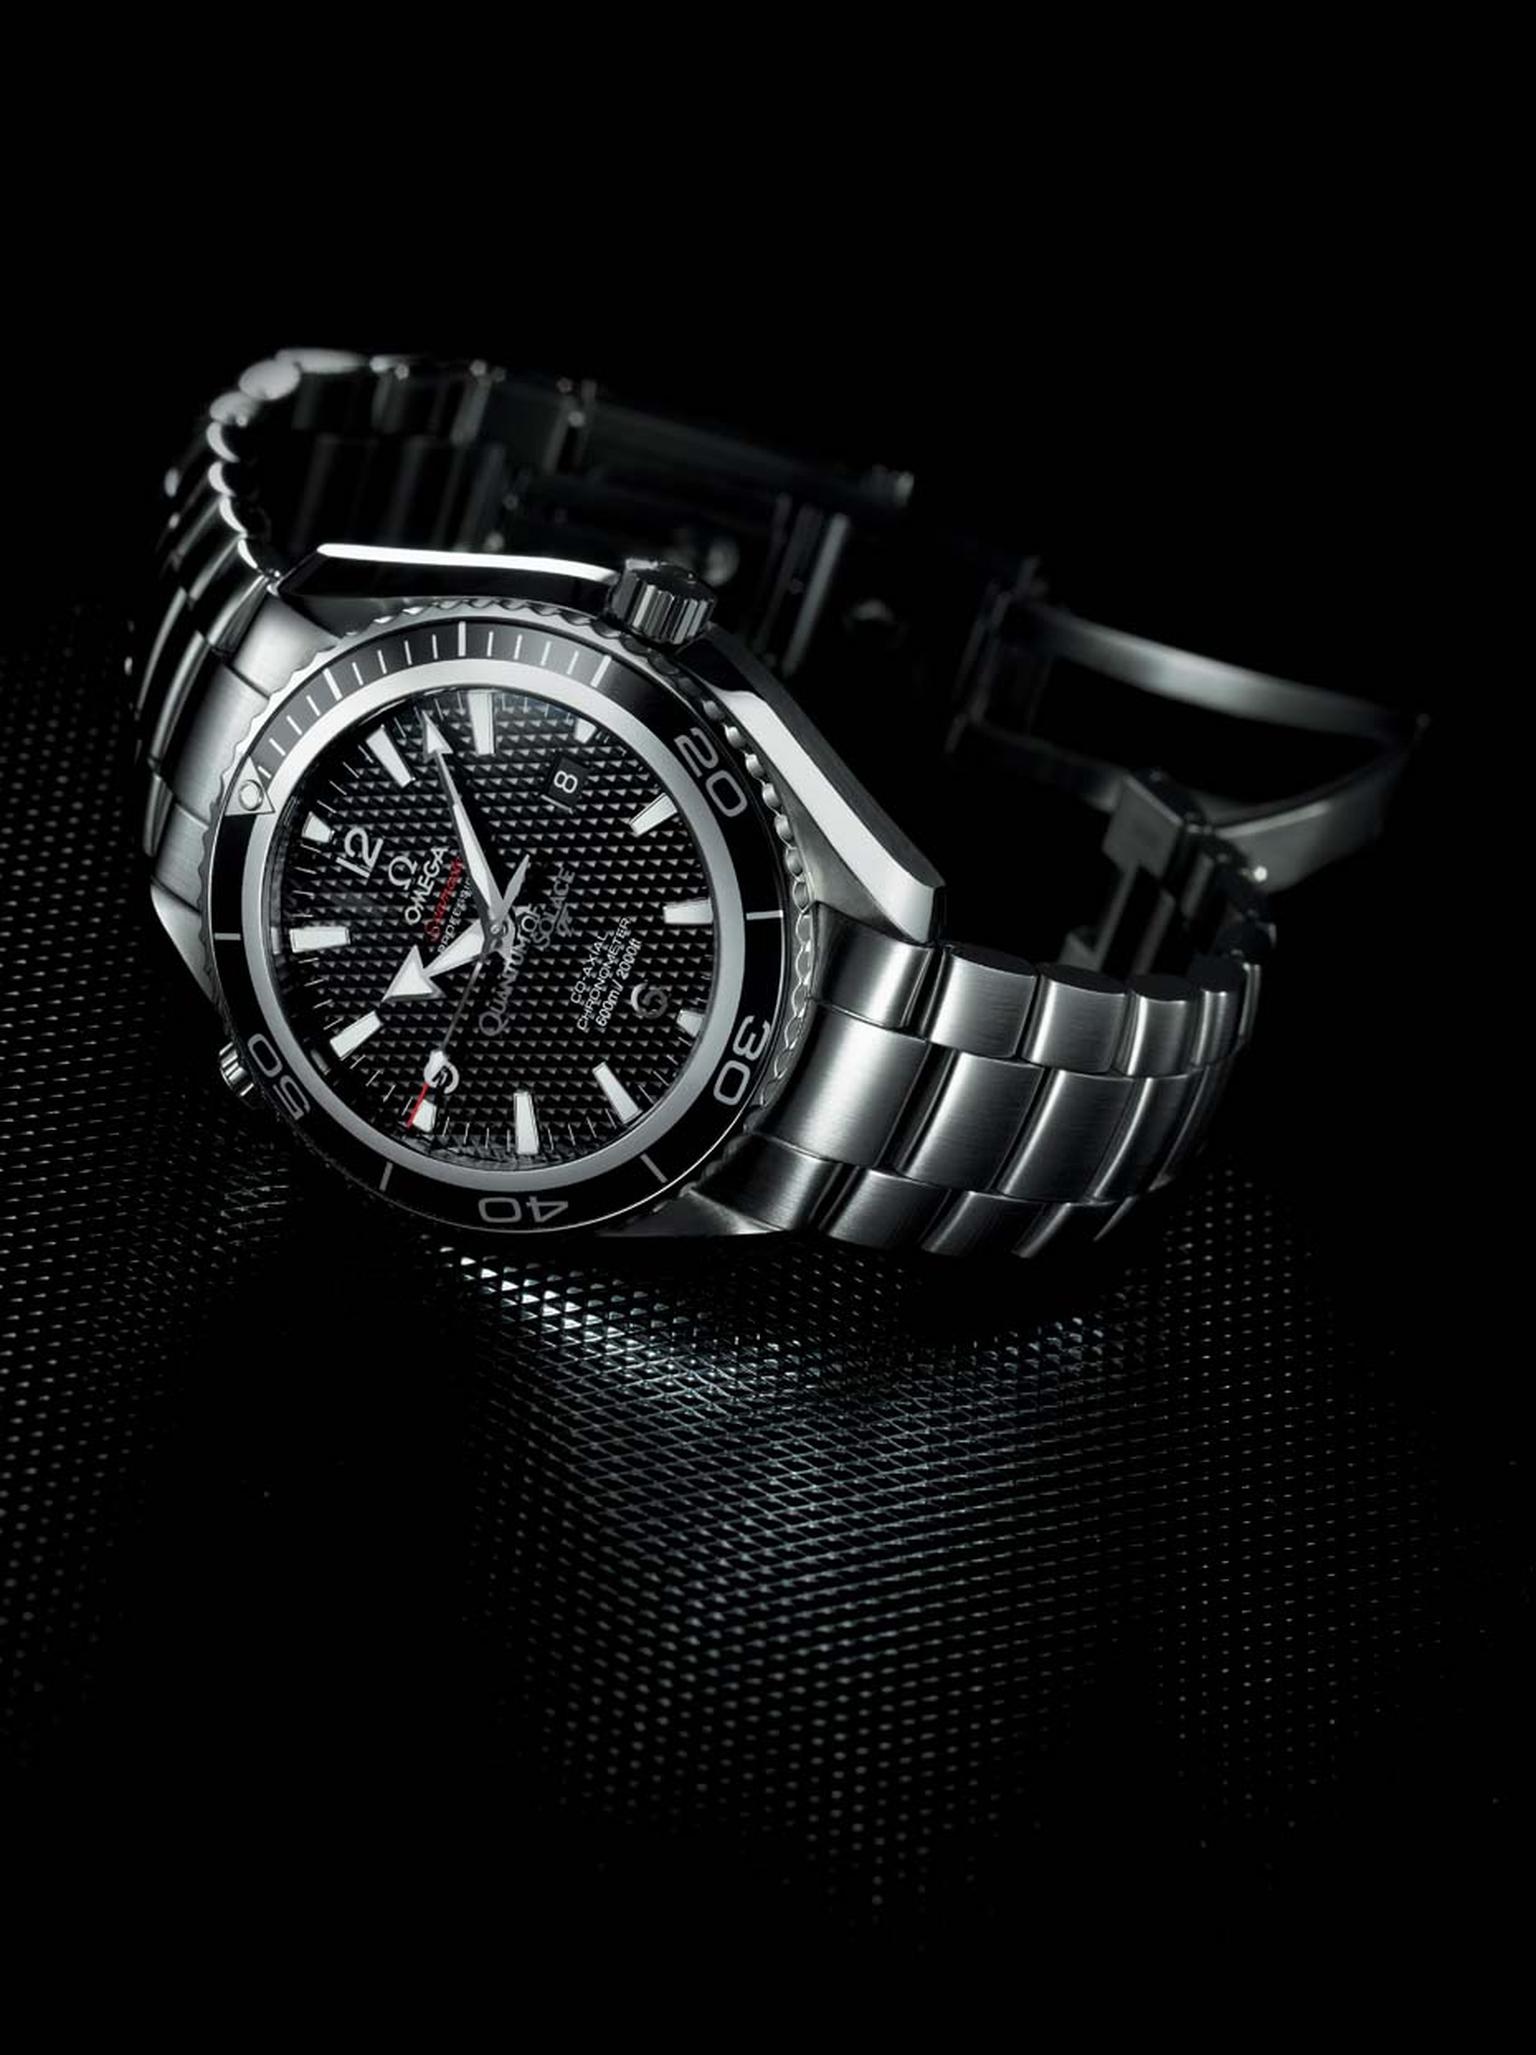 This limited edition of 5,007 pieces of the Omega Seamaster Planet Ocean 600m watch was produced to mark the release of Quantum of Solace.